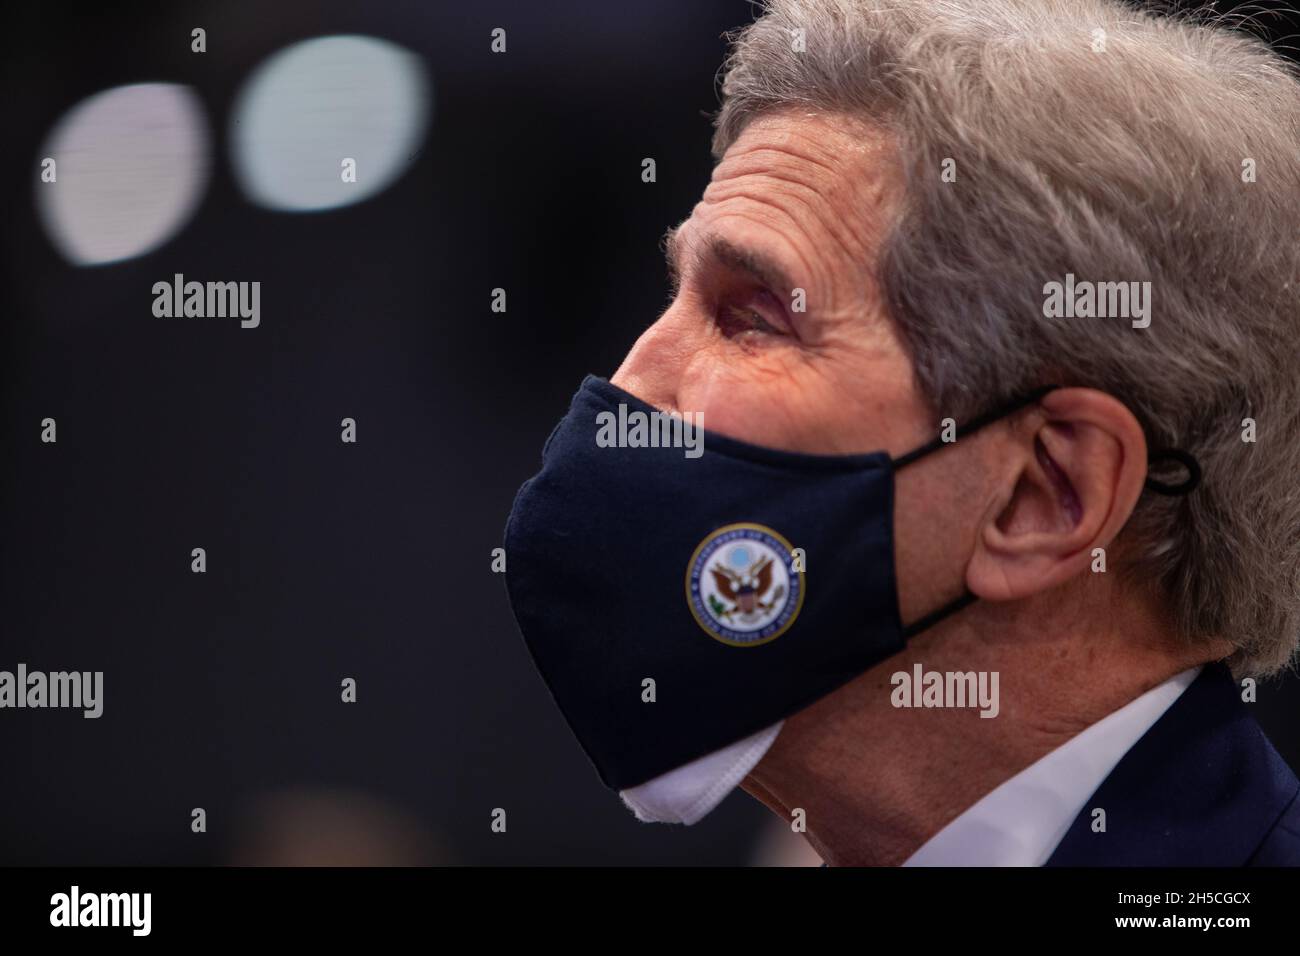 Glasgow, Scotland, UK. USA Special Envoy John Kerry listens as Barack Obama, former President of the United States of America, speaks at the 26th United Nations Climate Change Conference, known as COP26, in Glasgow, Scotland, UK, on 8 November 2021. Photo:Jeremy Sutton-Hibbert/Alamy Live News. Stock Photo